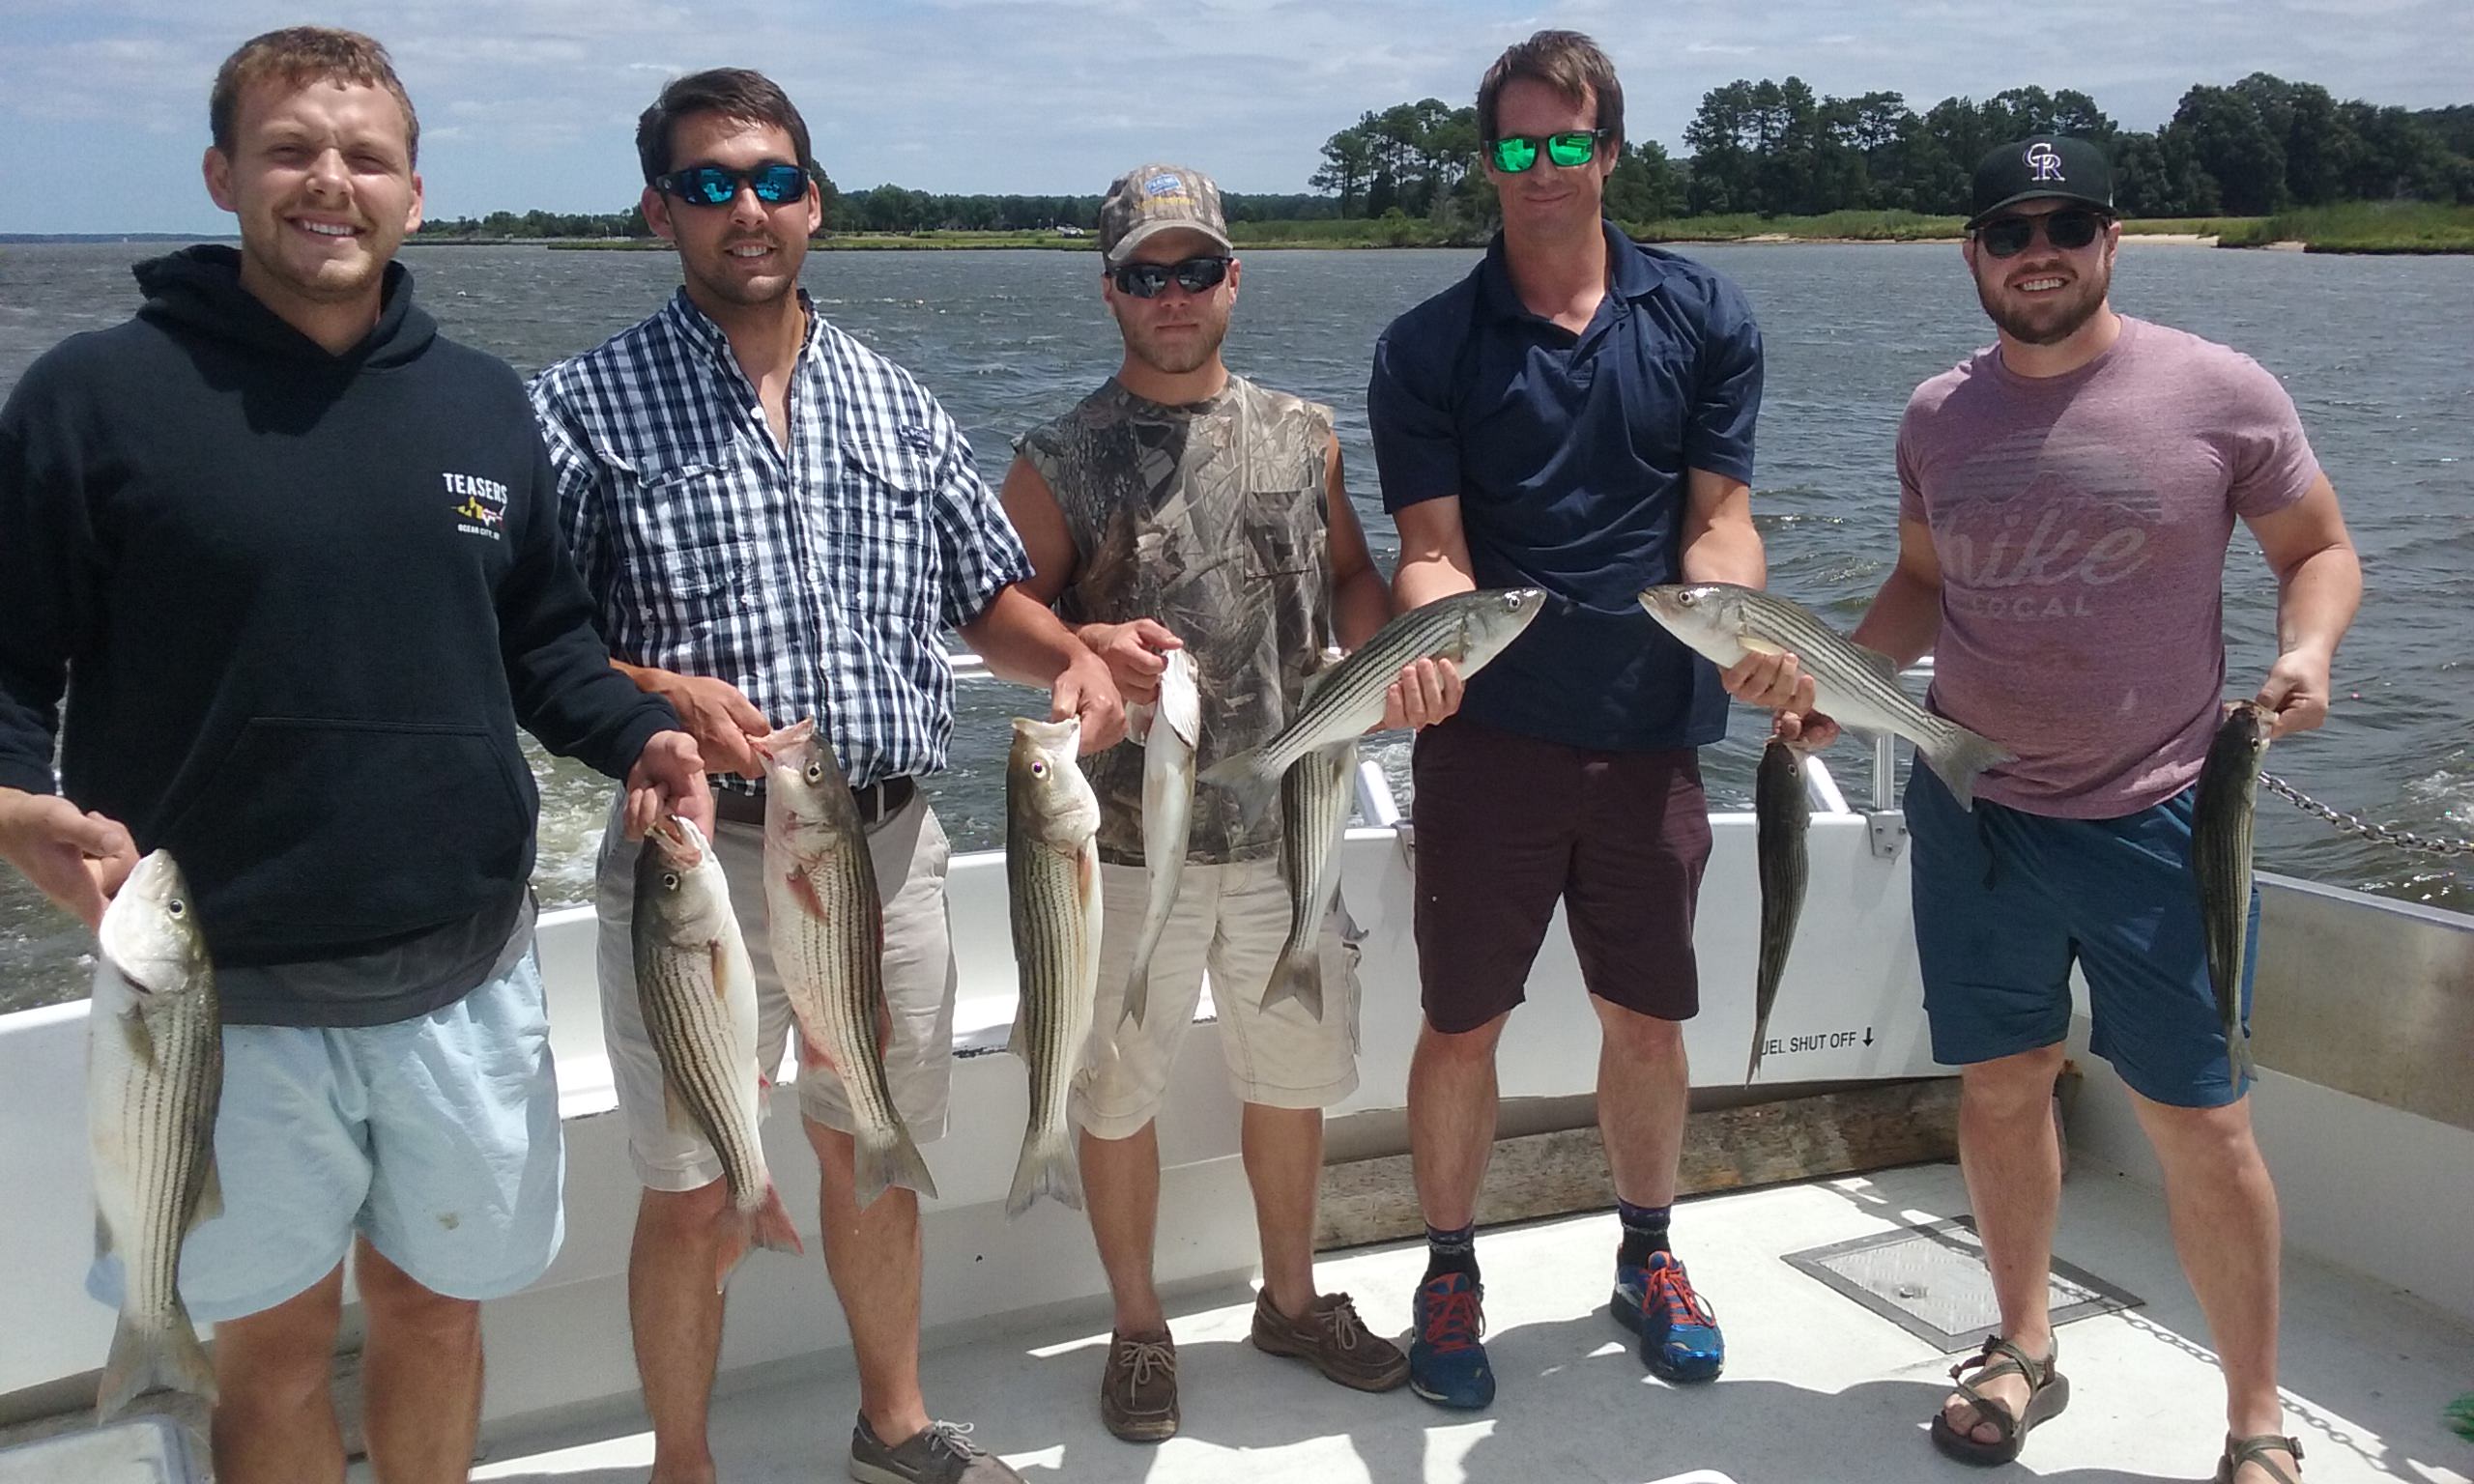 An Action-Packed Morning of Chesapeake Bay Striper Fishing!